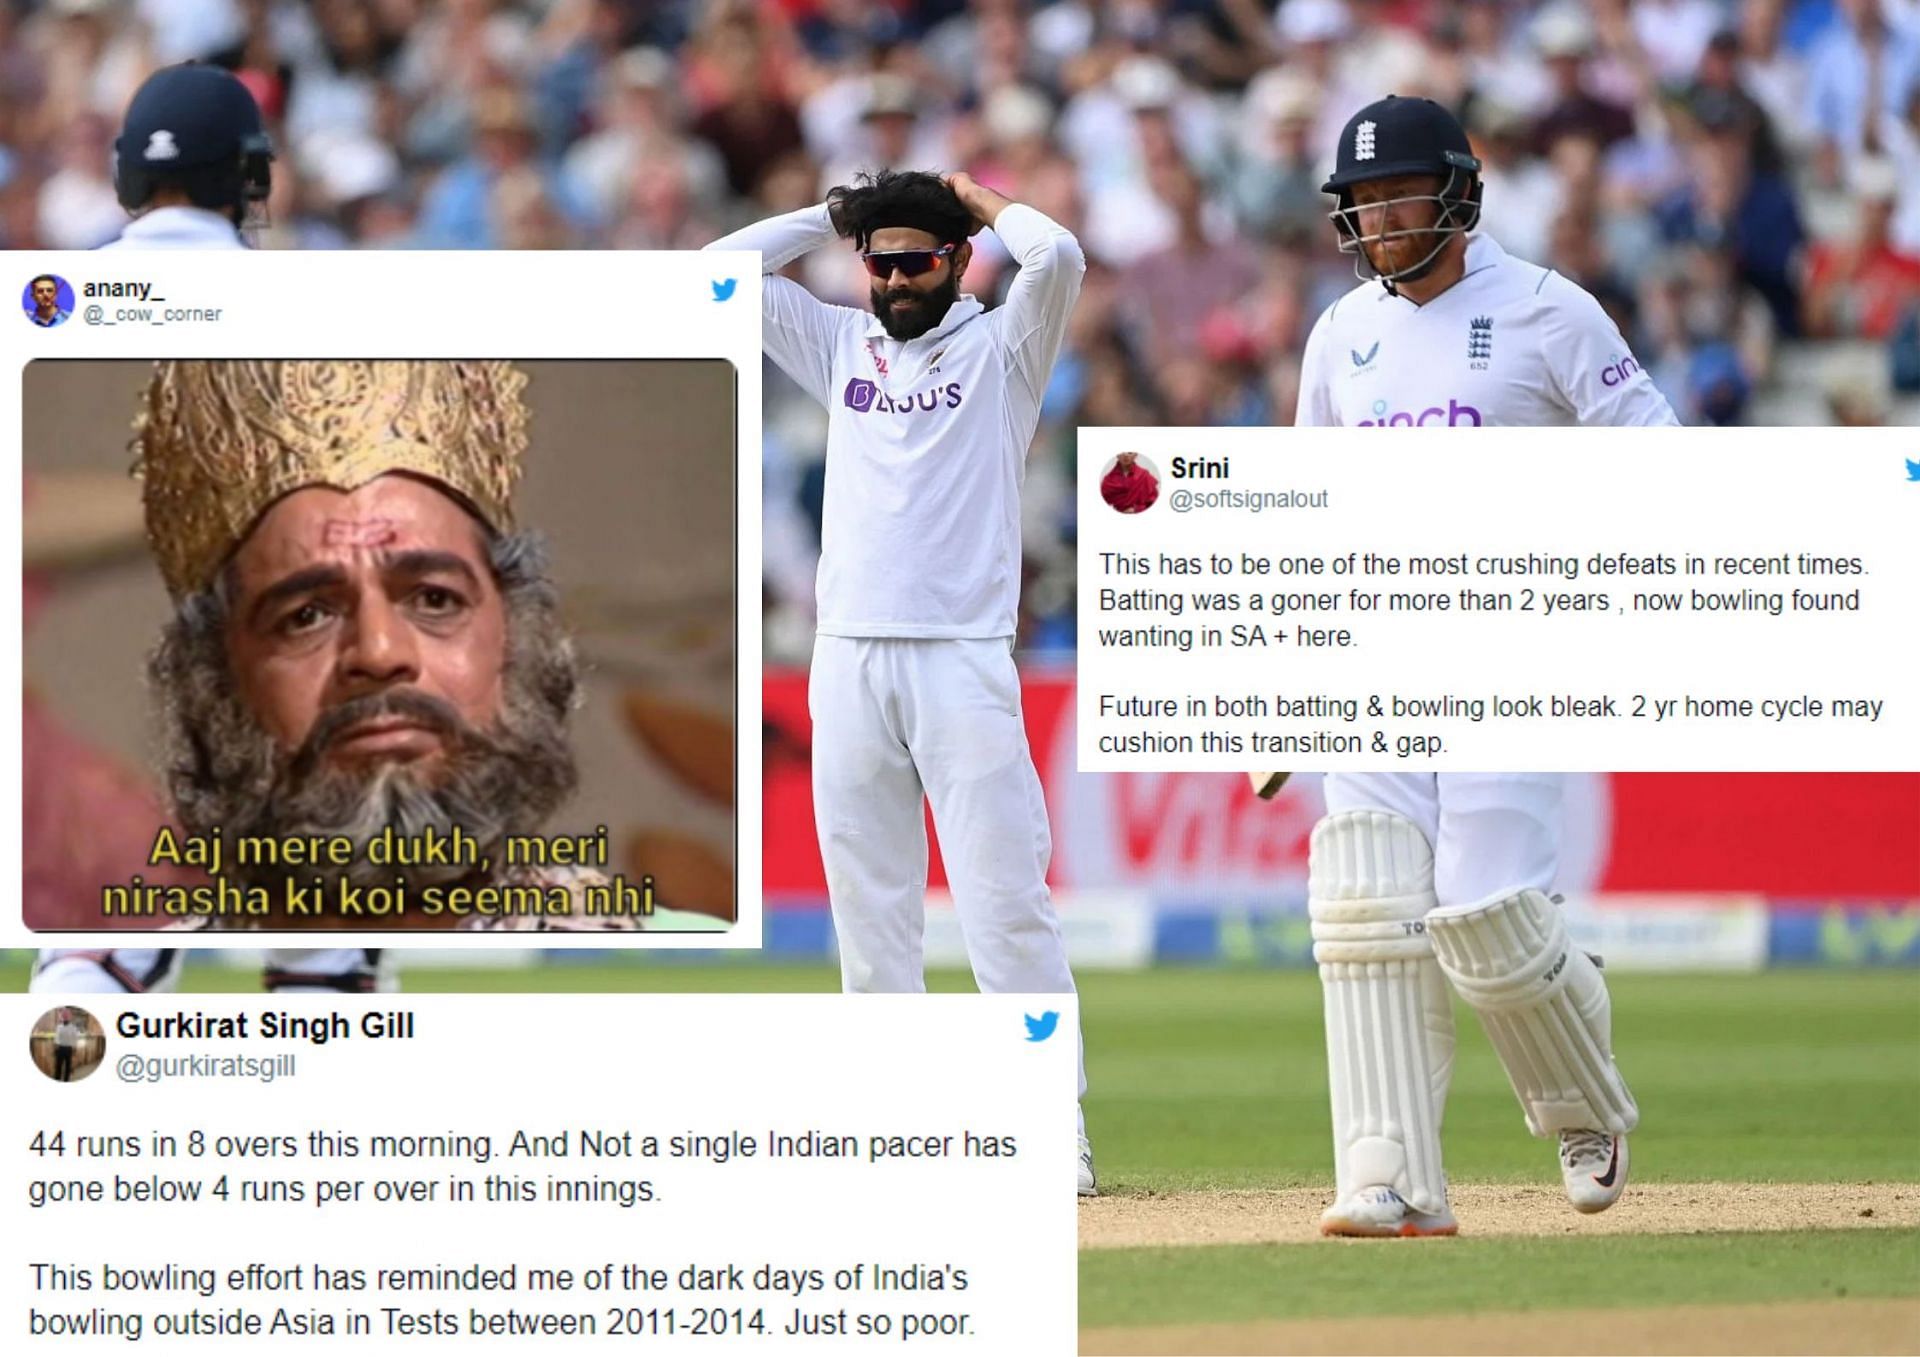 Twitterati expressed its displeasure over the Indian bowling performance at Edgbaston.